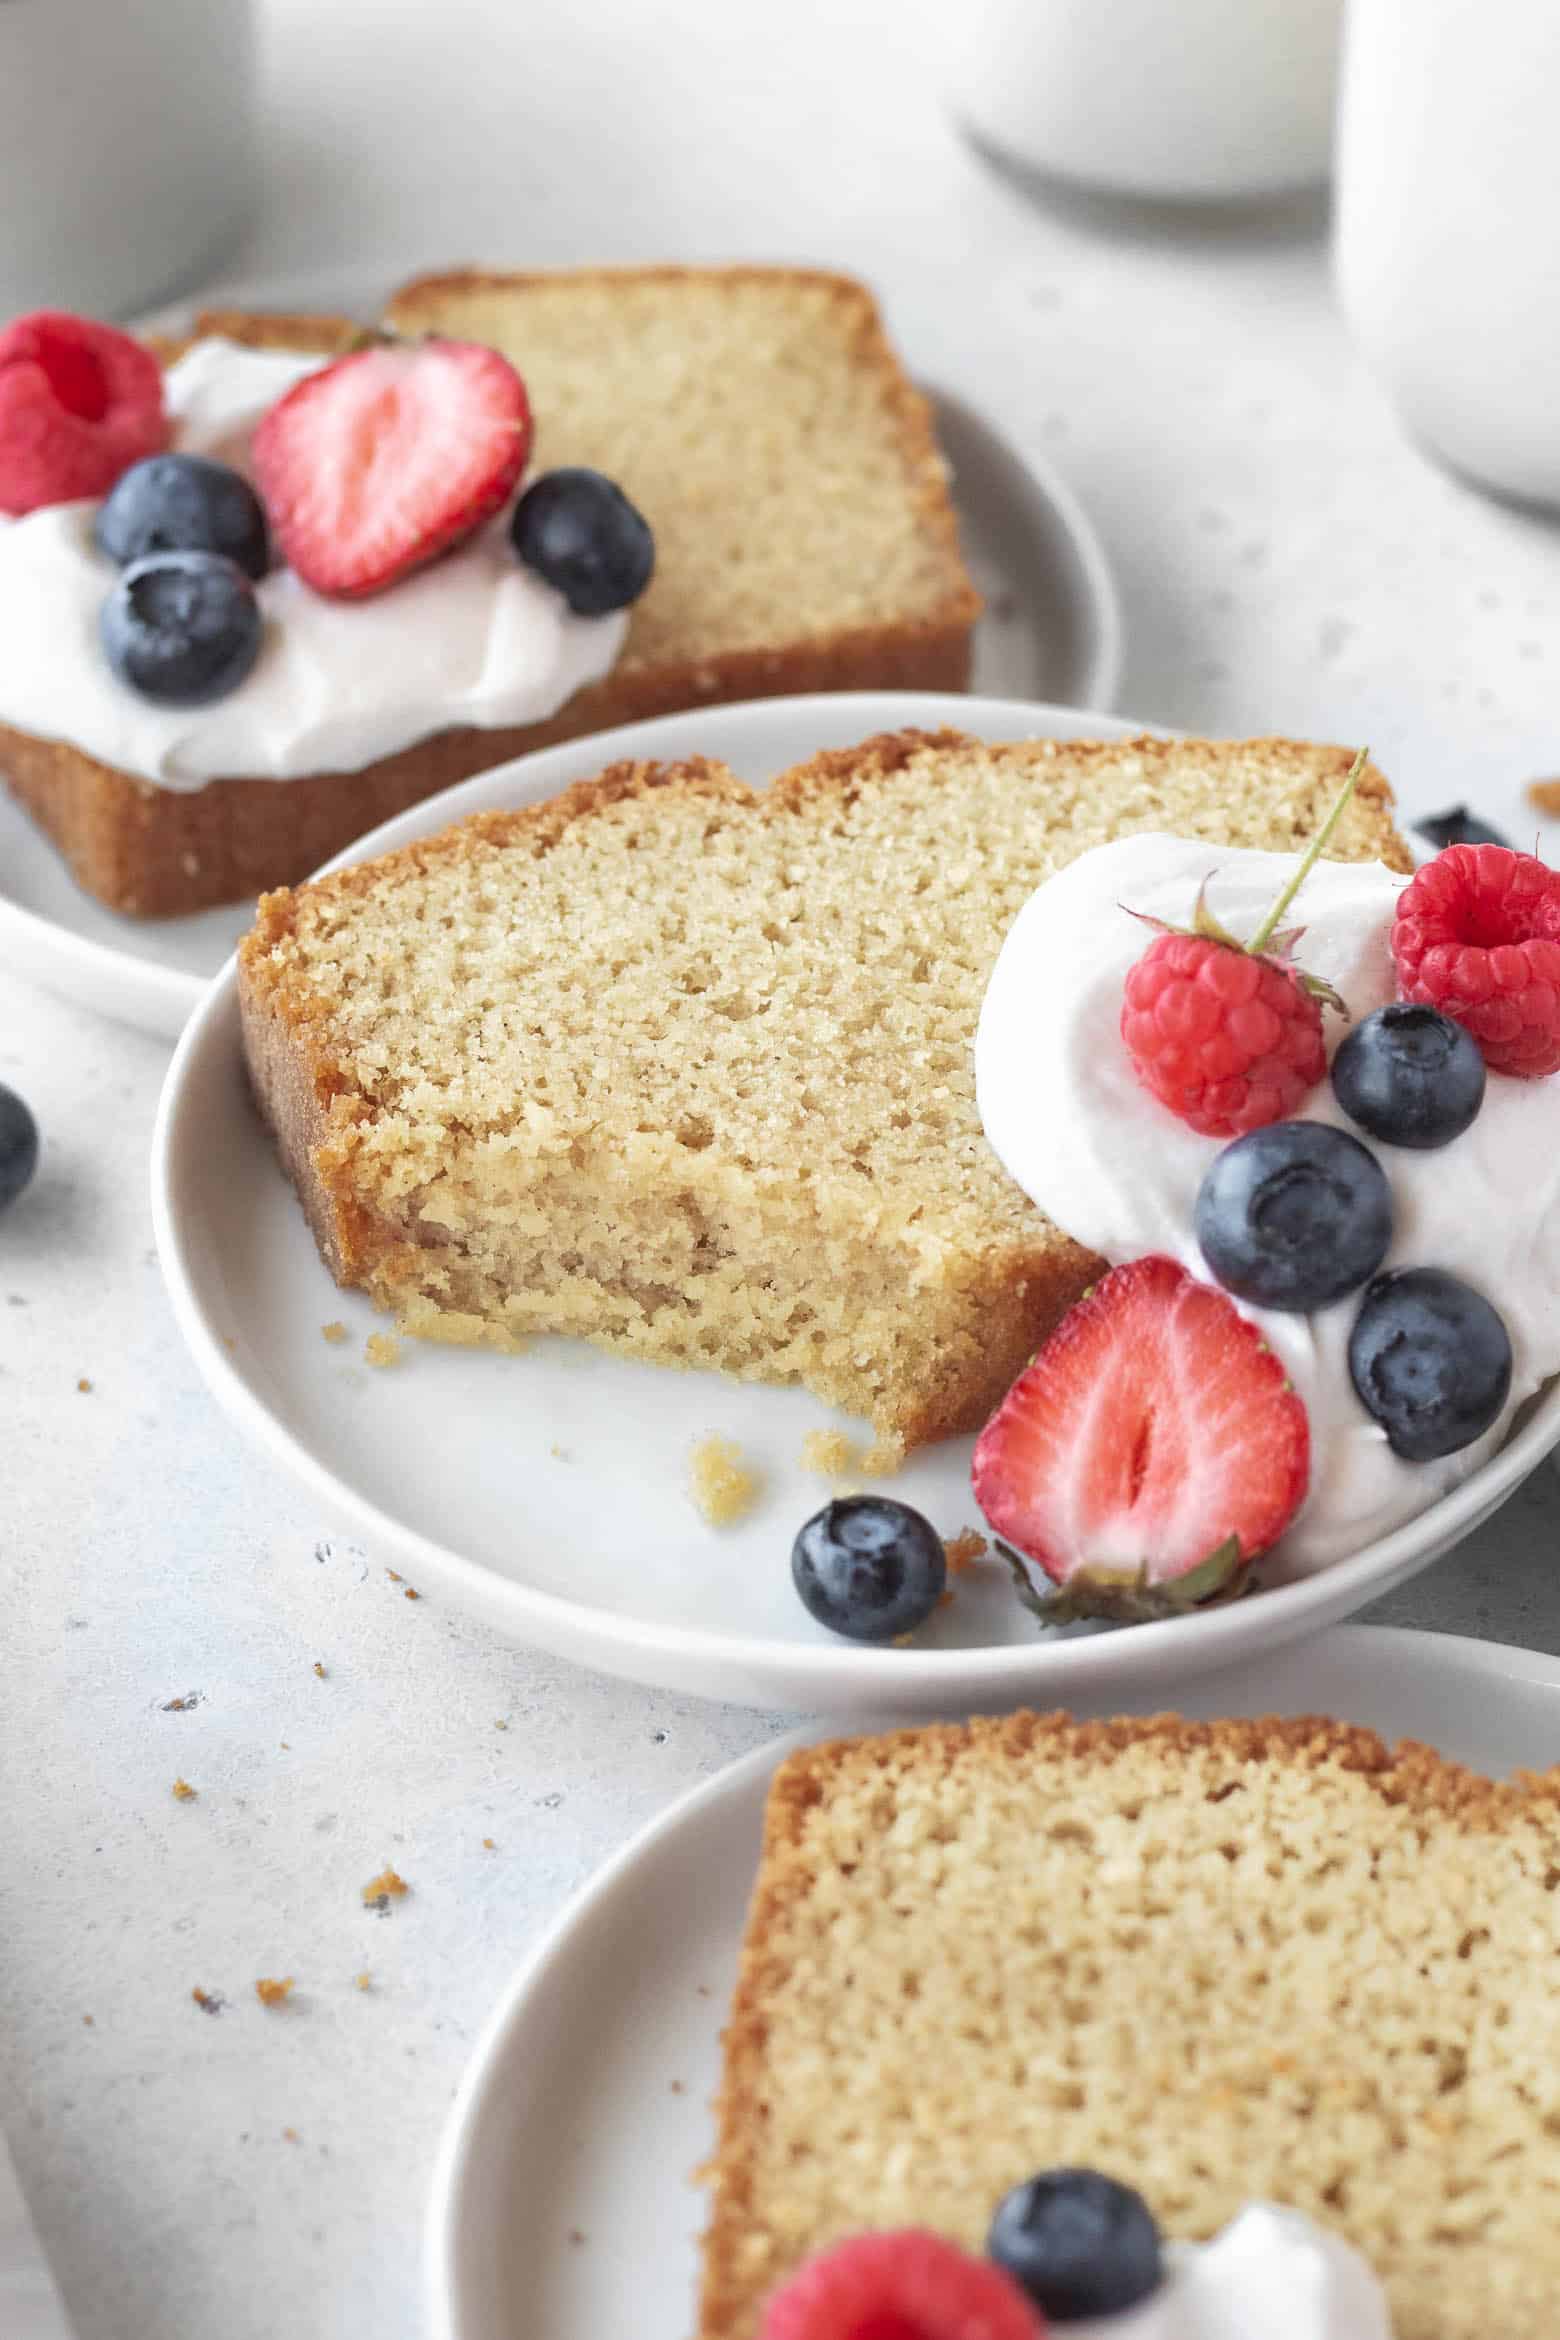 Tender gluten free pound cake on a plate.